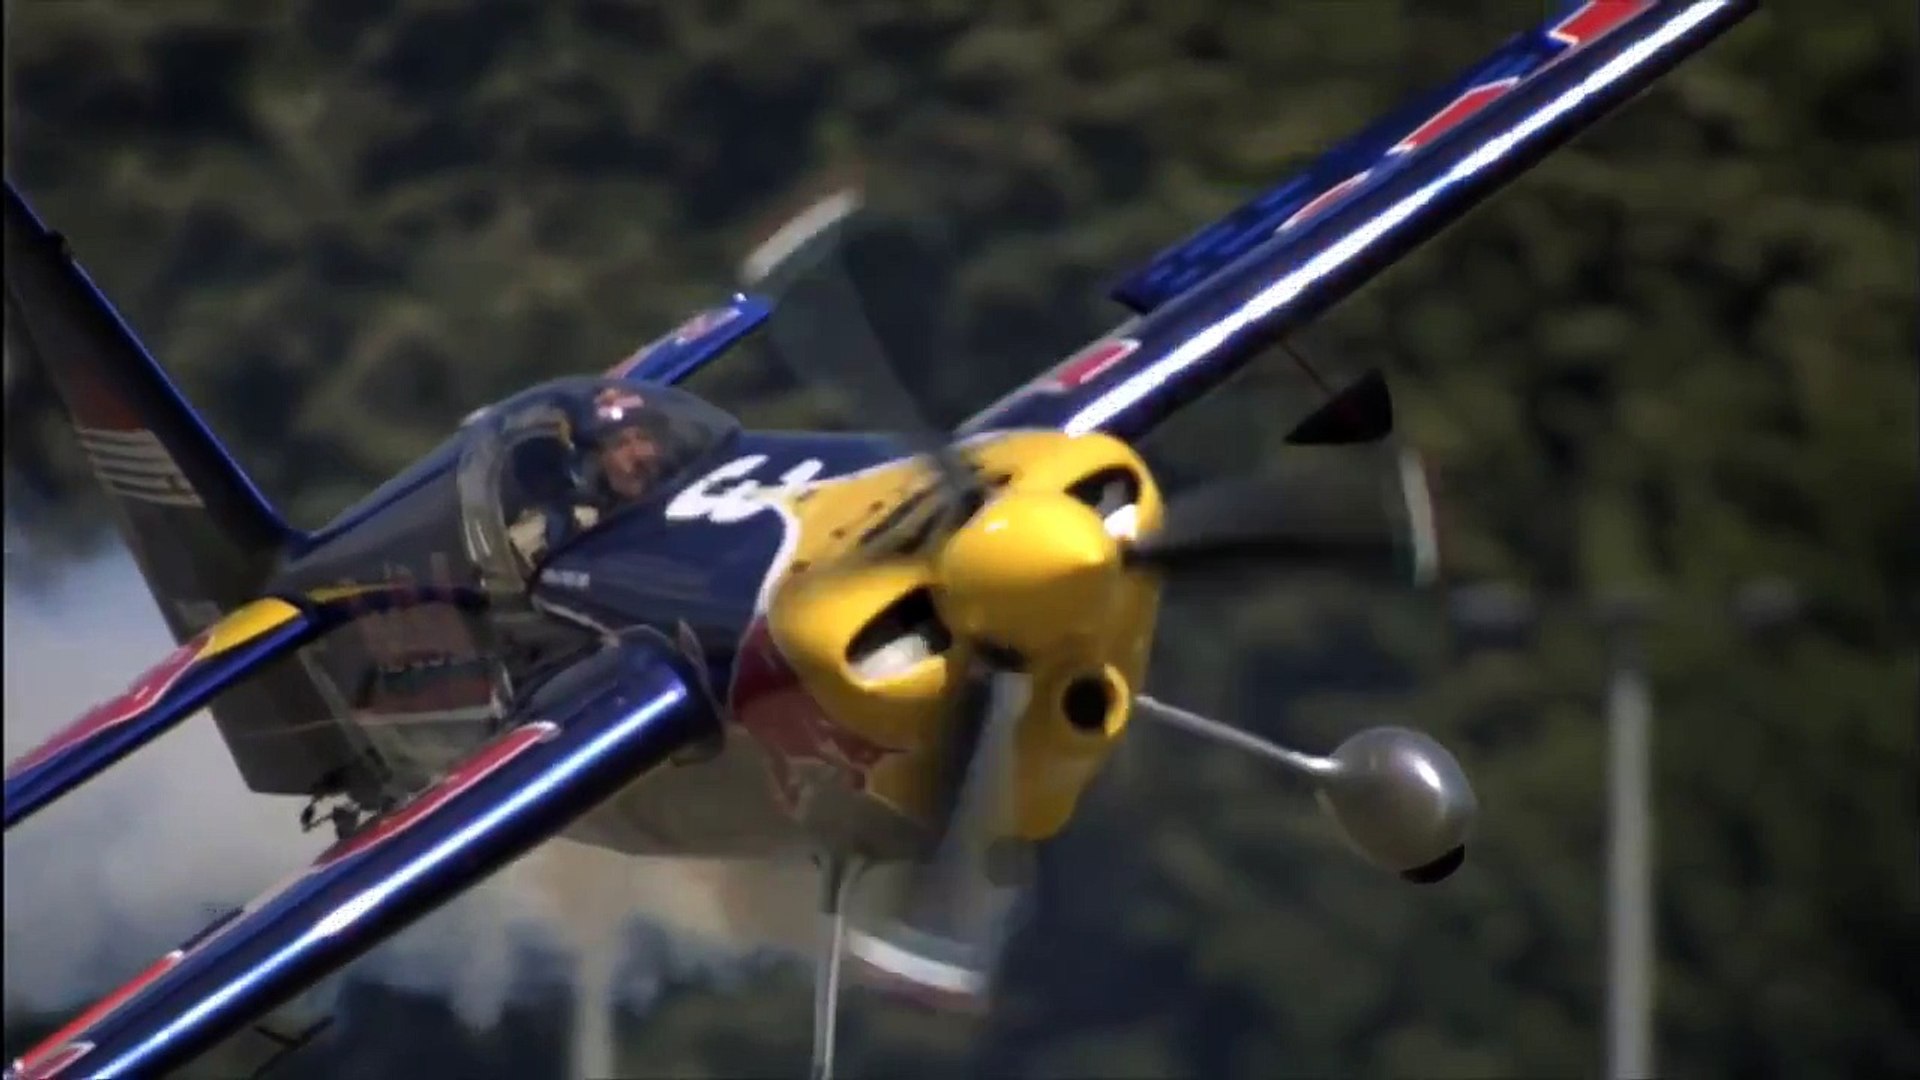 ANTELOPE - Ultra Slow Motion Camera, Red Bull Air Race